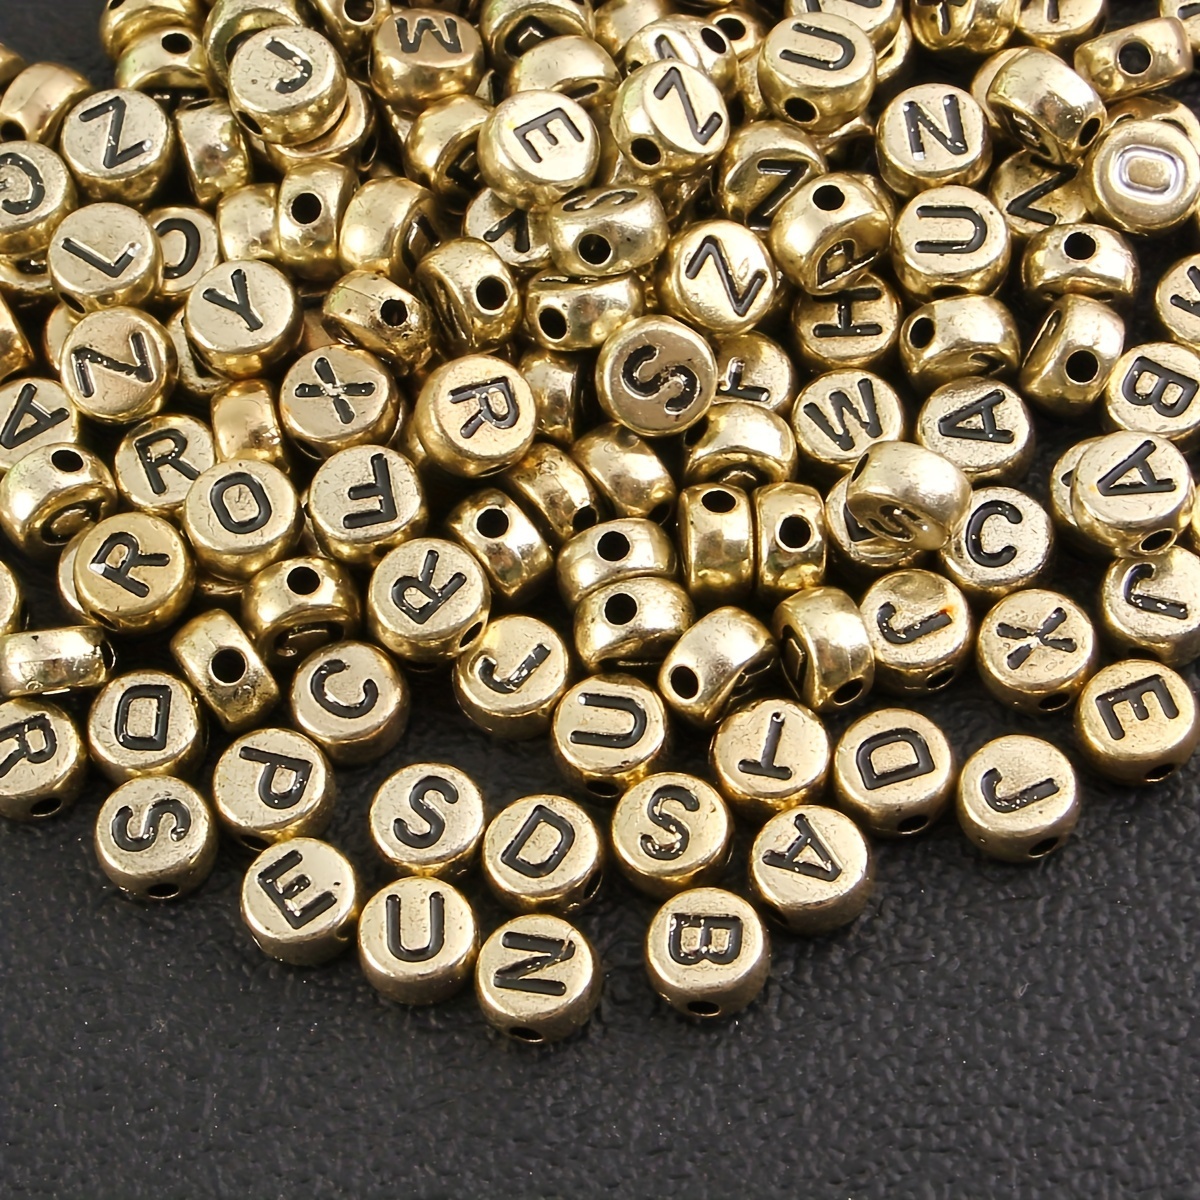 Gold Alphabet Bead With Letter Imprint Metallic Letter Beads Round